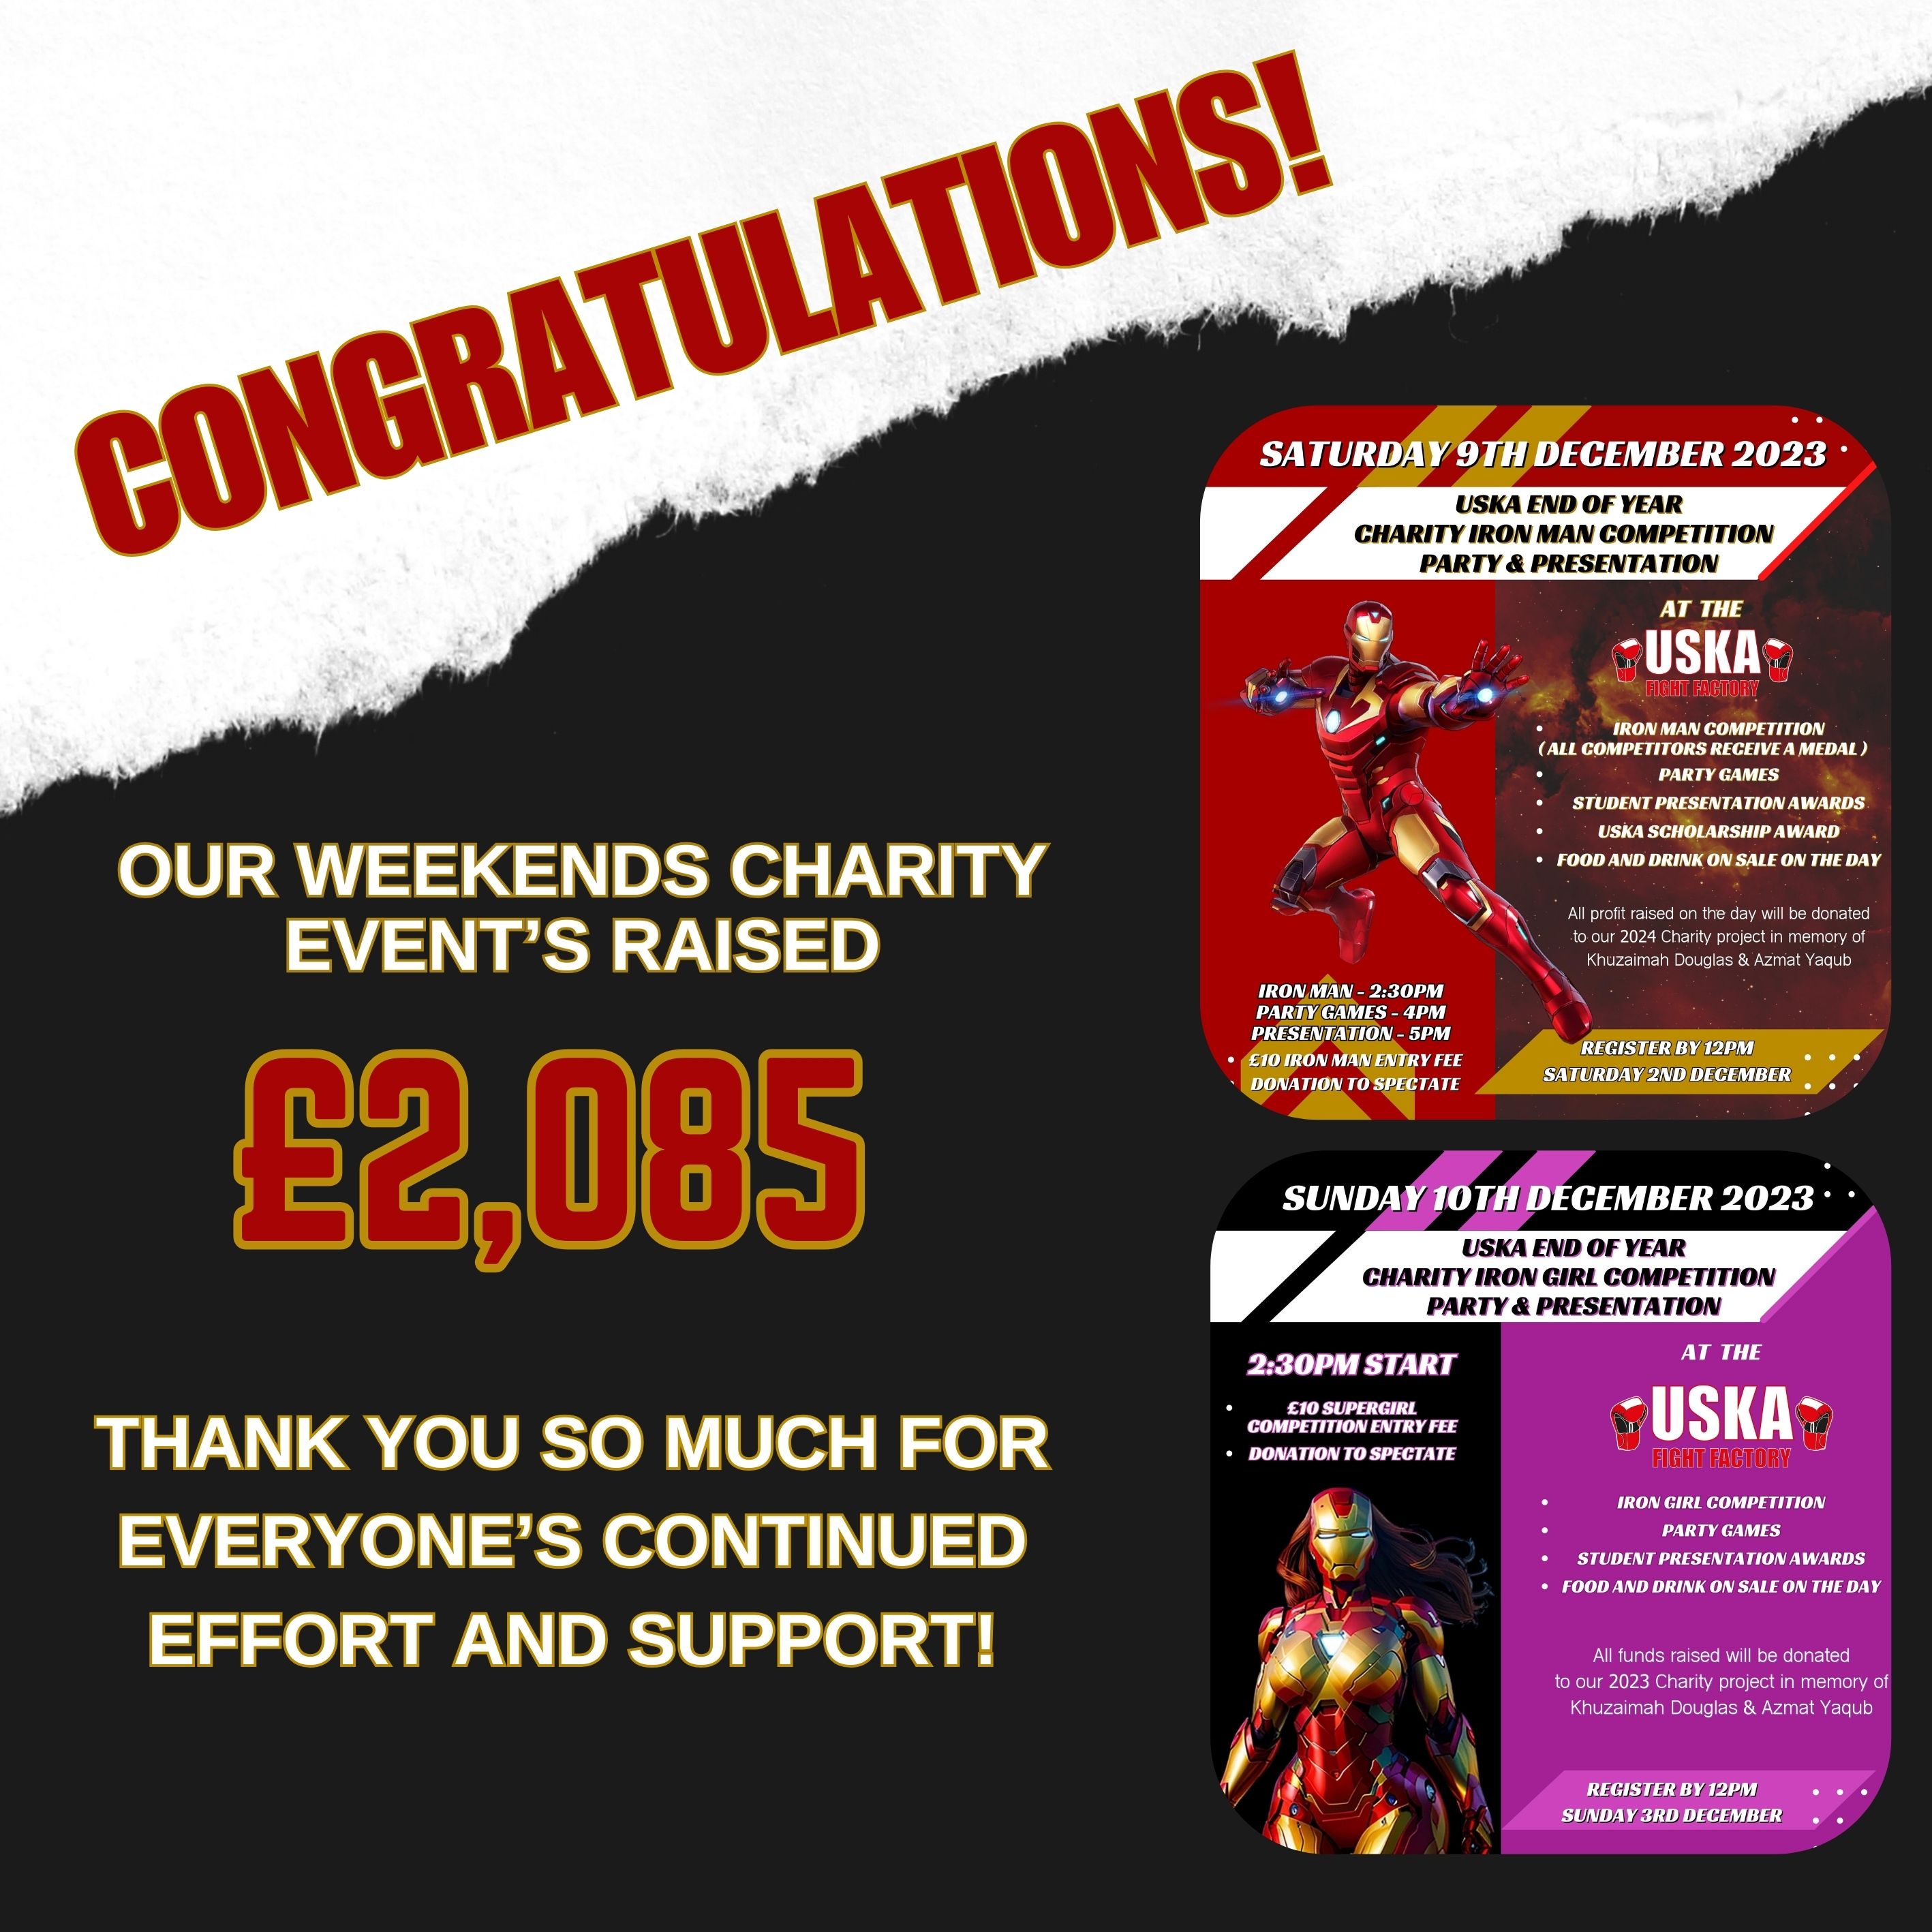 11-12-23 - The Charity Total Raised From Our End Of Year Events Is....